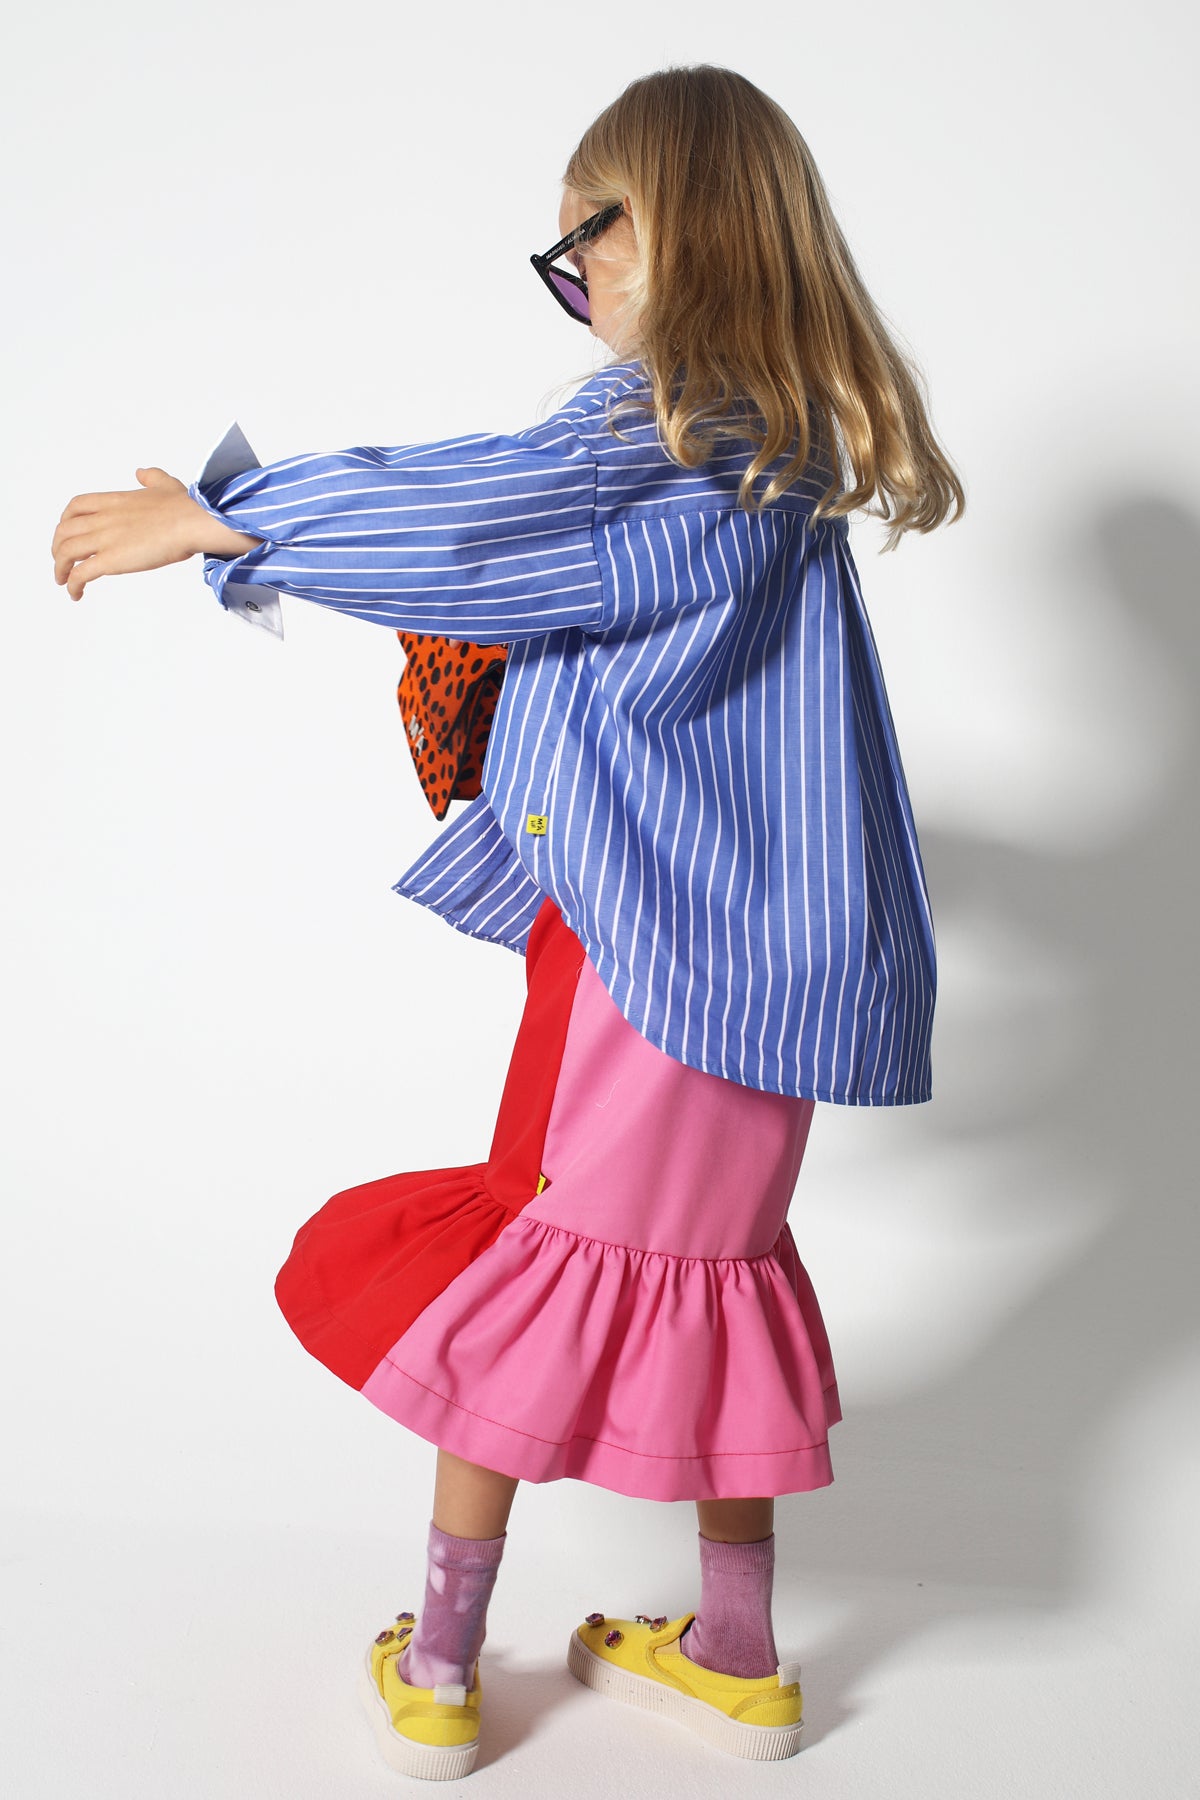 BLUE AND WHITE STRIPED LOOSE SHIRT makids